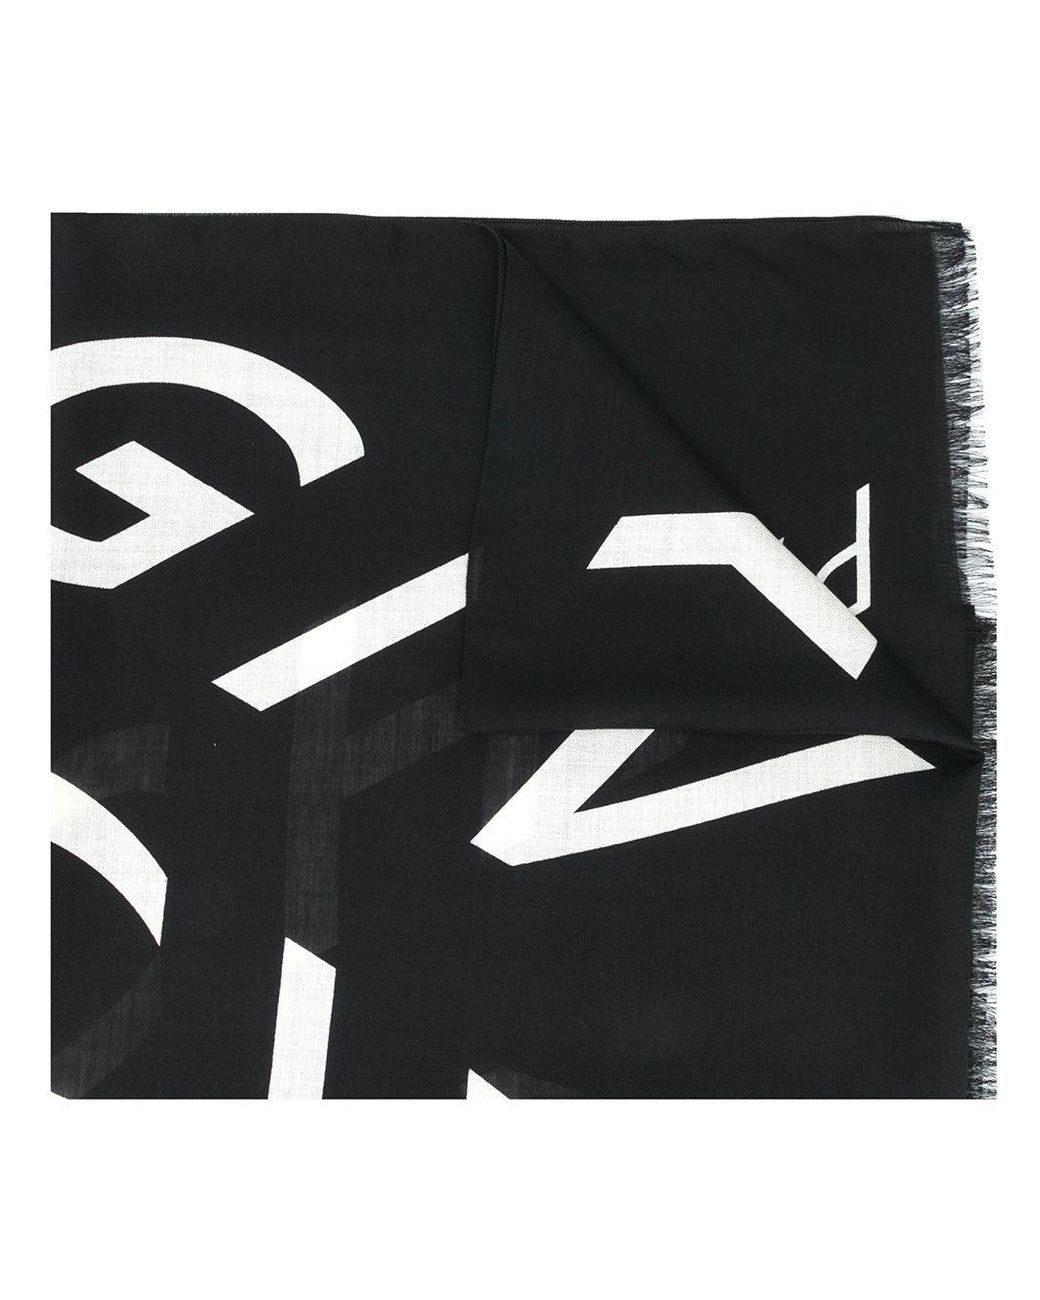 Givenchy Silk Scarf in Black for Men - Lyst